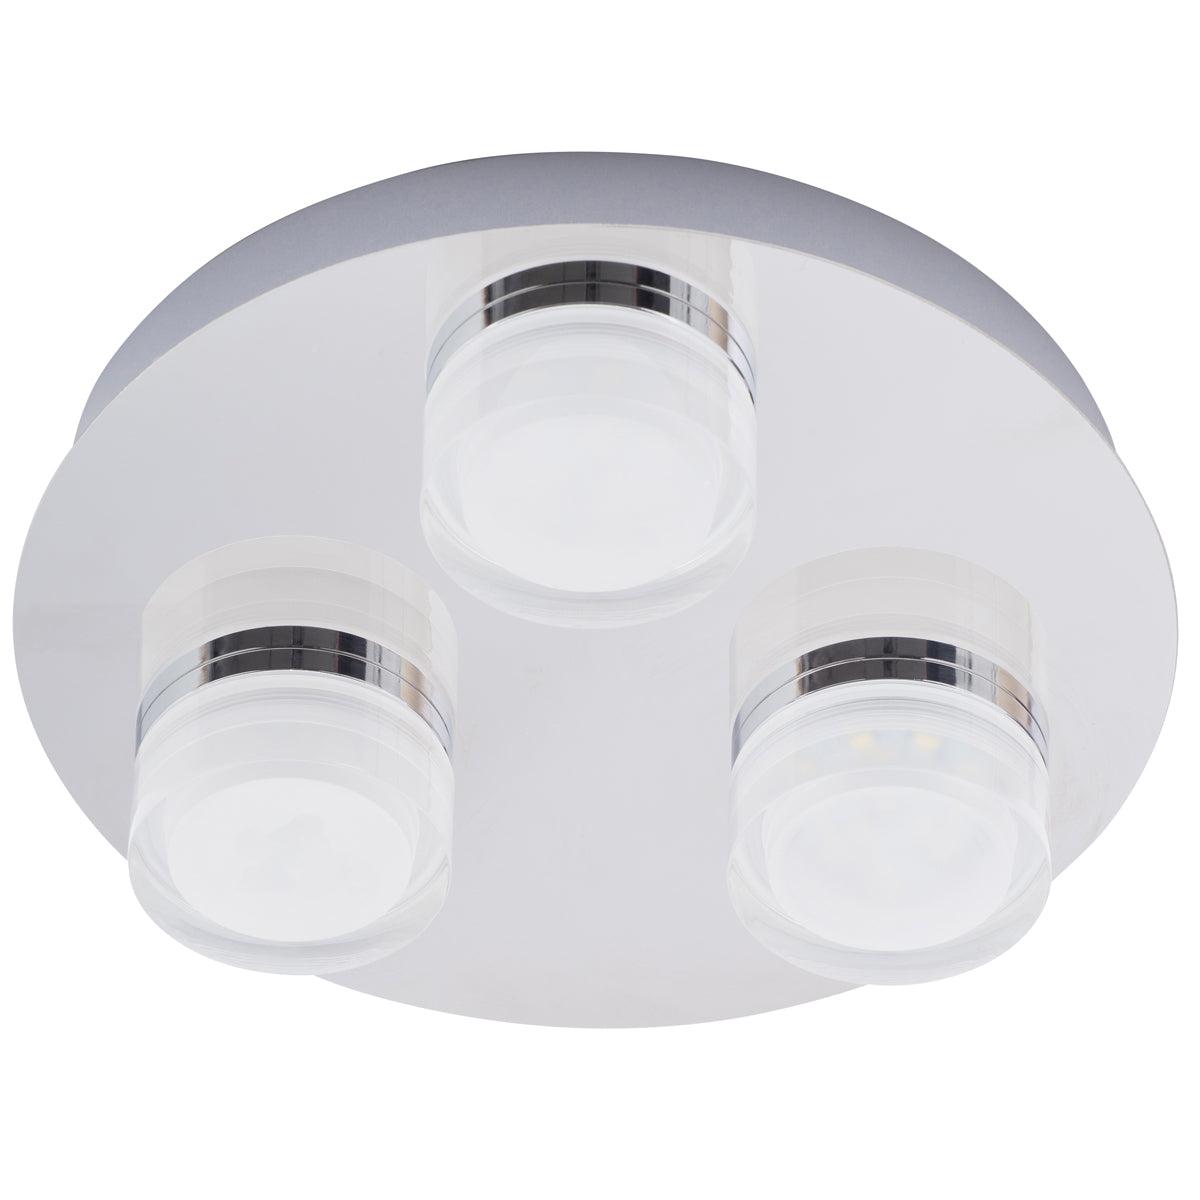 Create a relaxing ambience for your home using this flush Geneva fitting. Topped with an opal glass shade, a subdued glow will brighten your kitchen, bathroom or hallways. The one light sits in the centre of the fitting and is surrounded by a ring of satin silver. LED's use up to 75% less energy and last up to 20 times longer than incandescent bulbs.